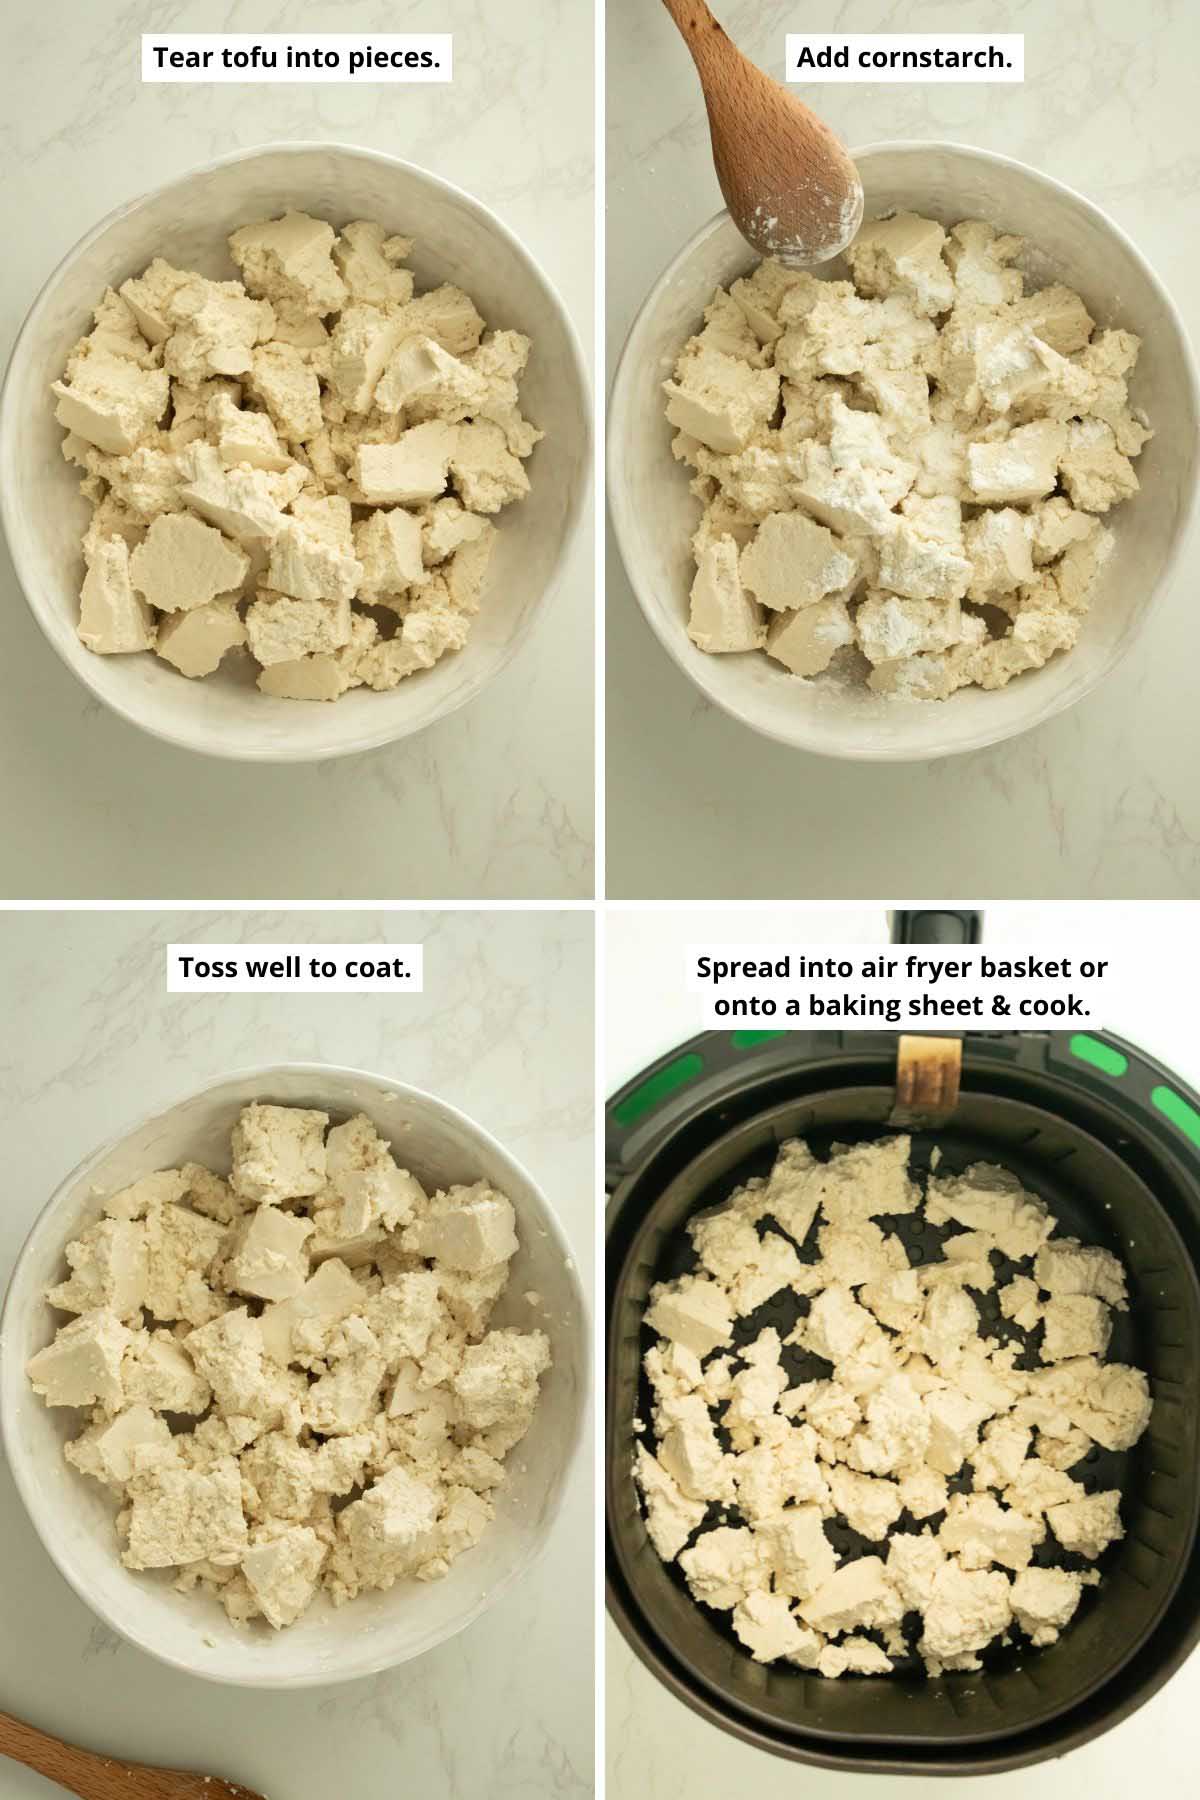 image collage showing coating the tofu in cornstarch and transferring to the air fryer basket